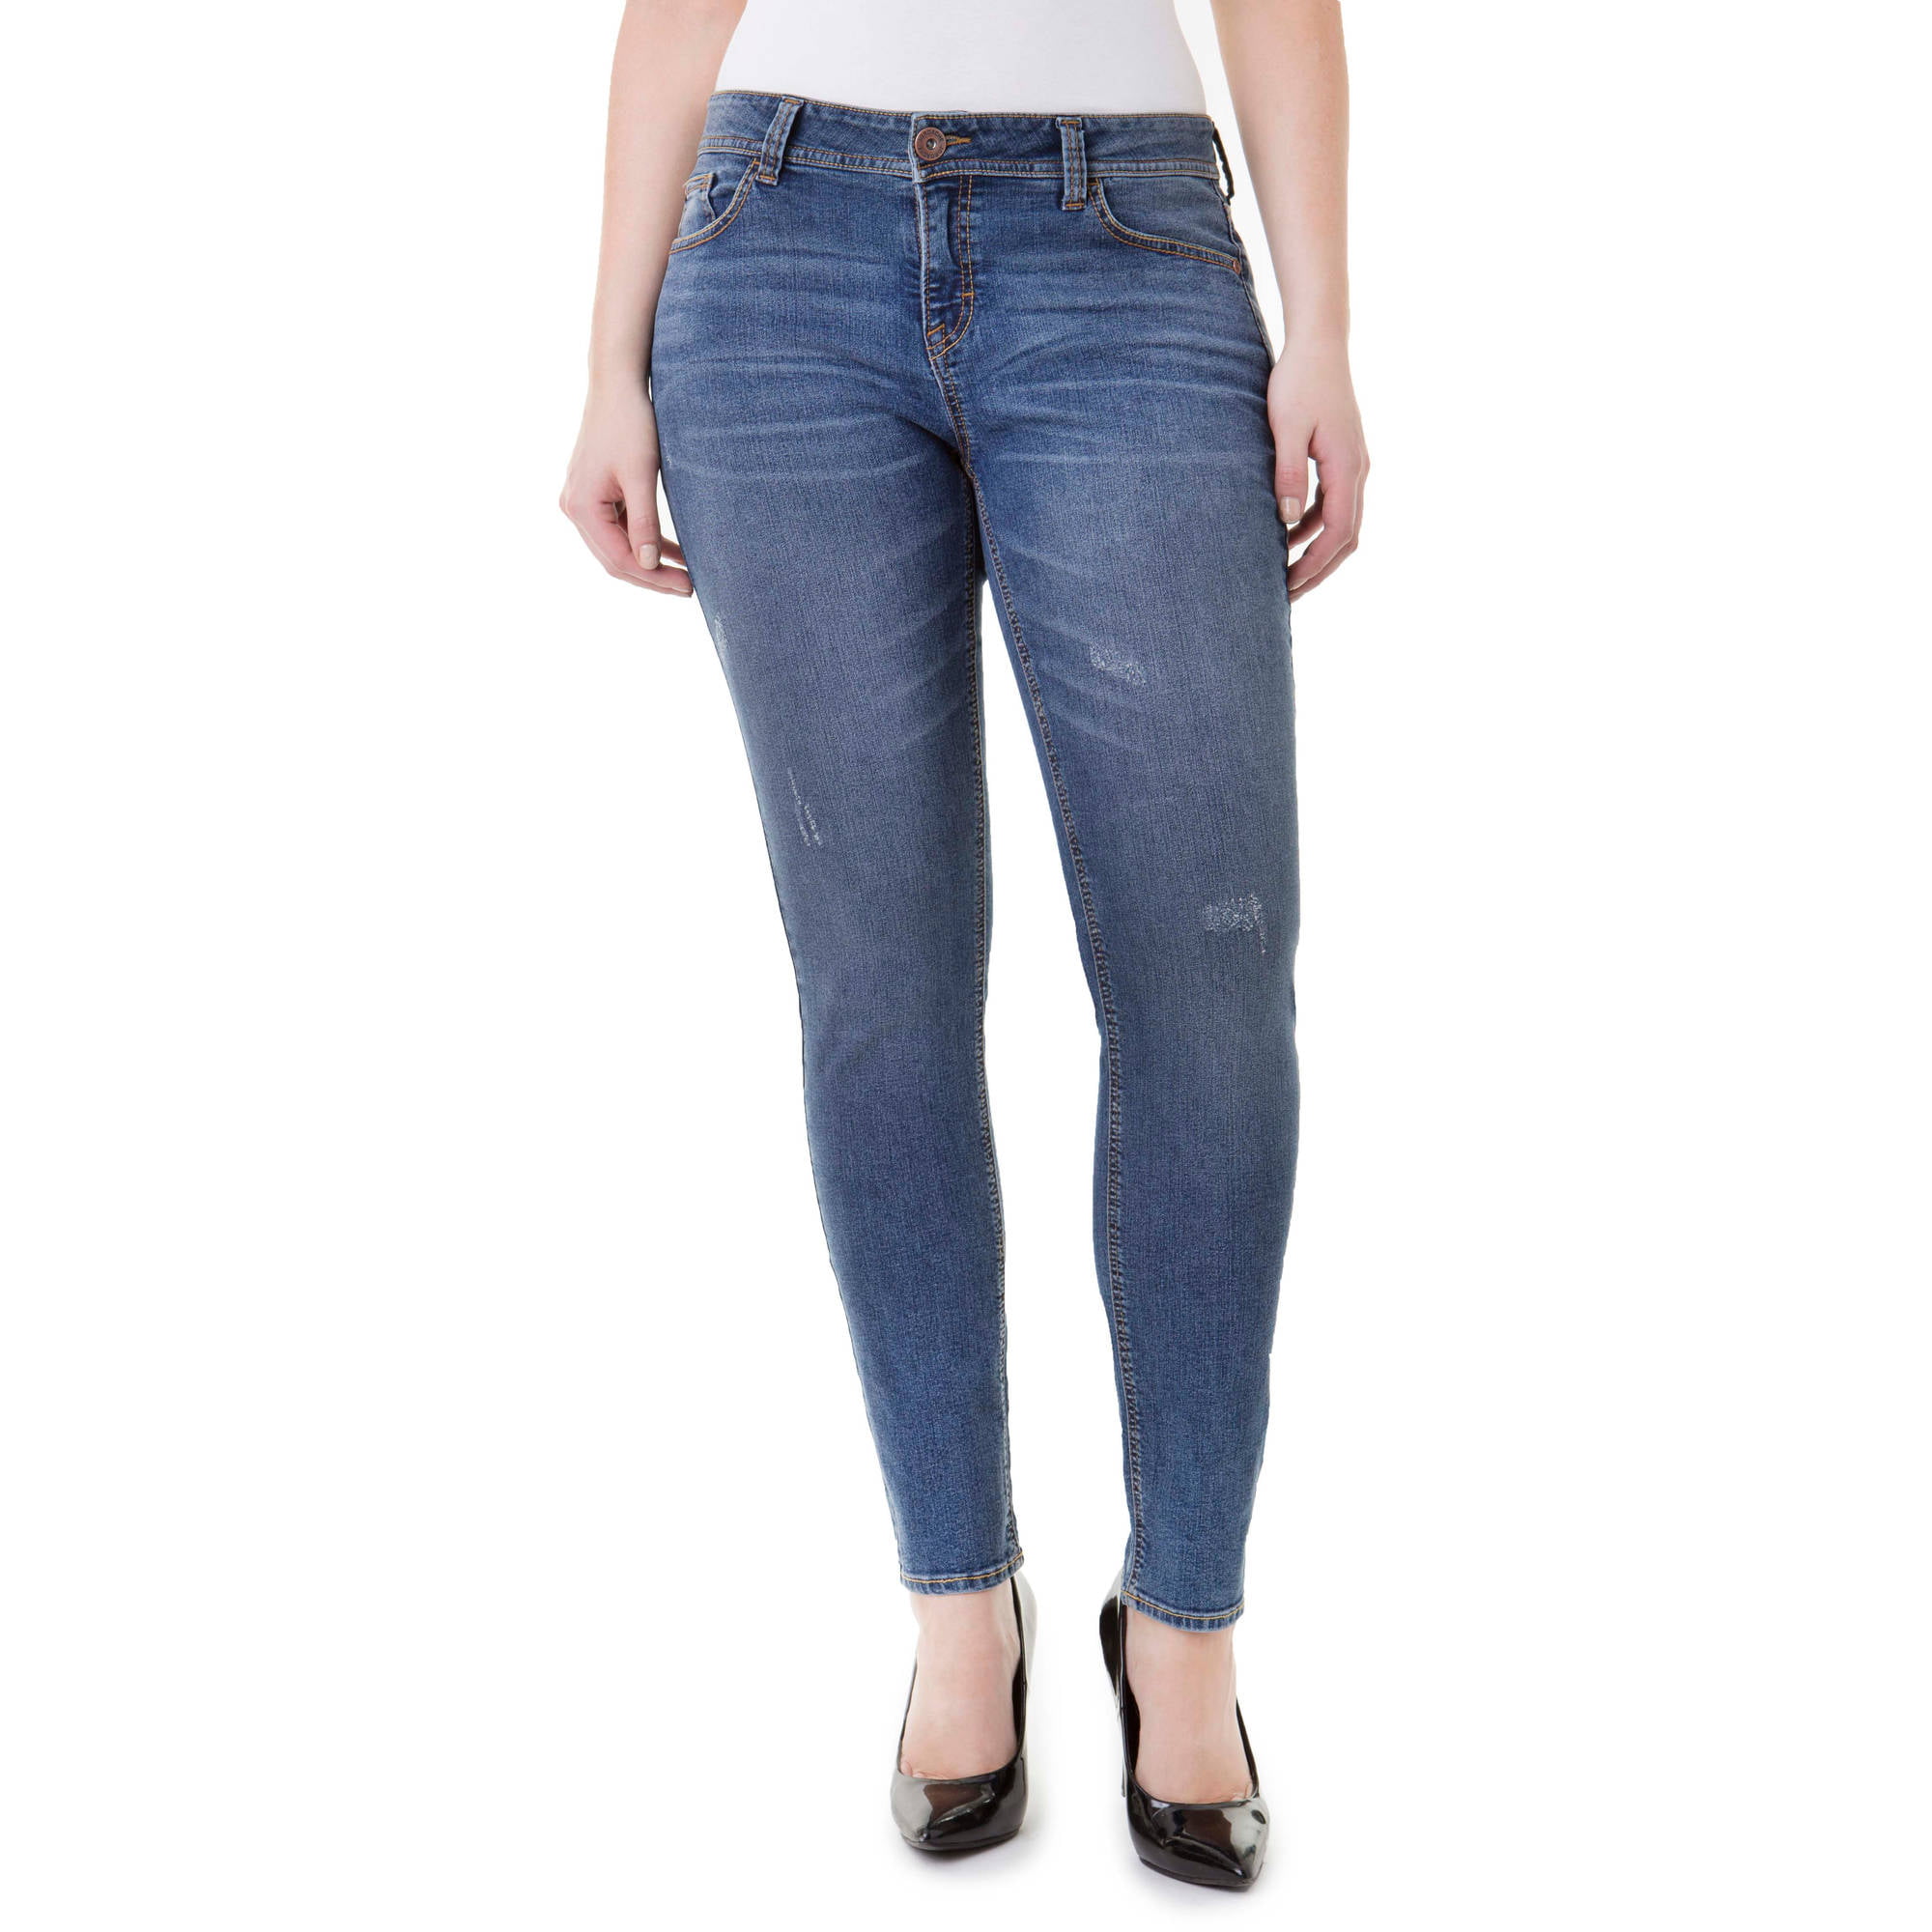 one 5 one women's french terry skinny jeans dark wash | Most Effective ...